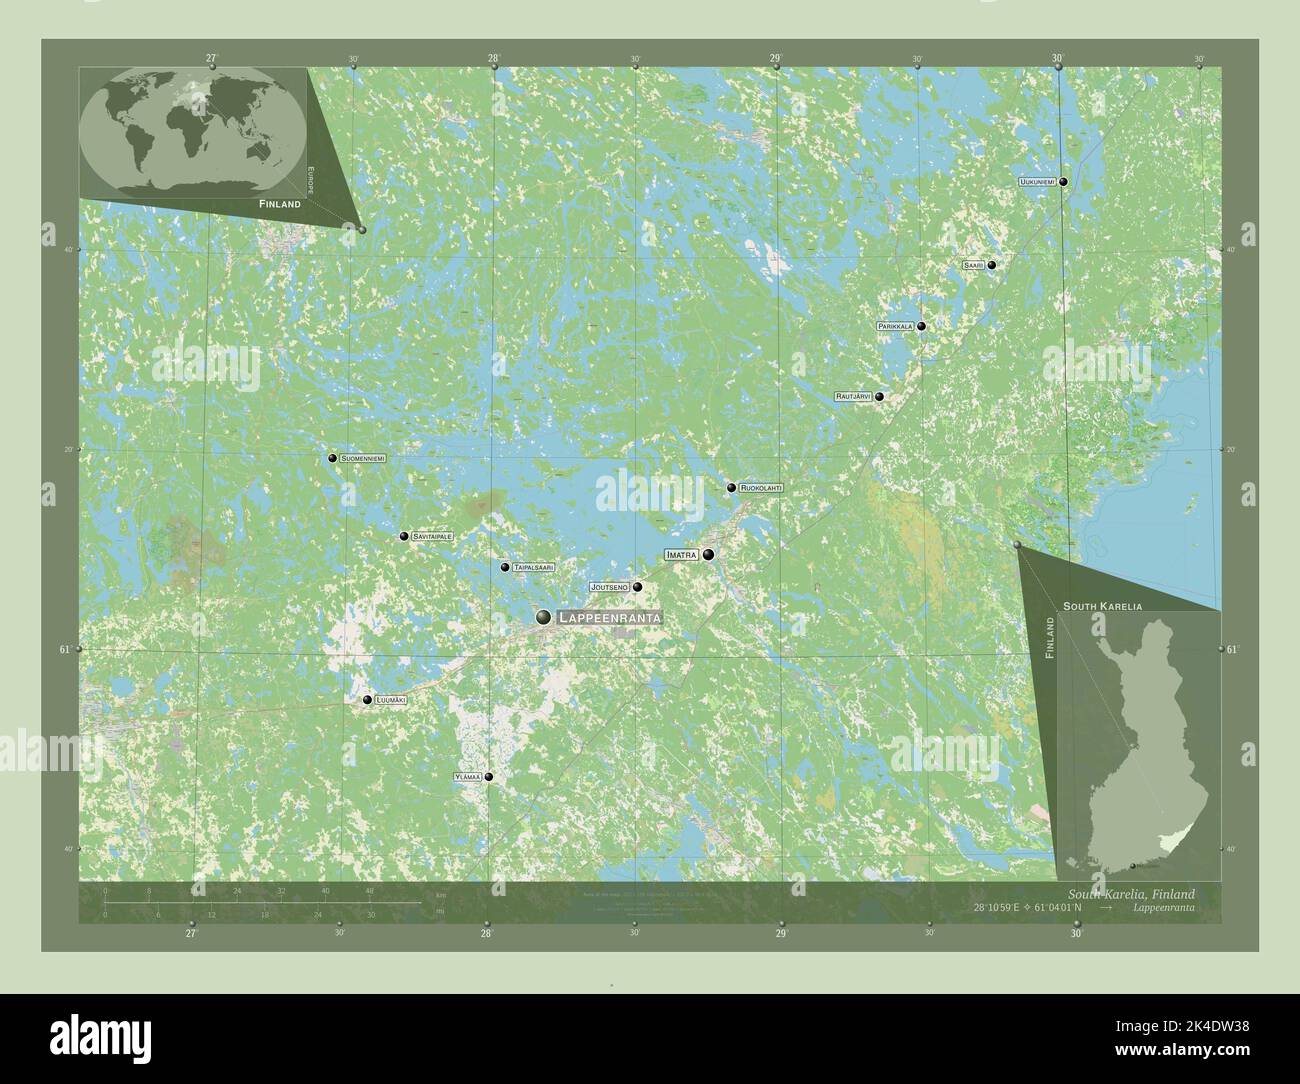 South Karelia, region of Finland. Open Street Map. Locations and names of major cities of the region. Corner auxiliary location maps Stock Photo